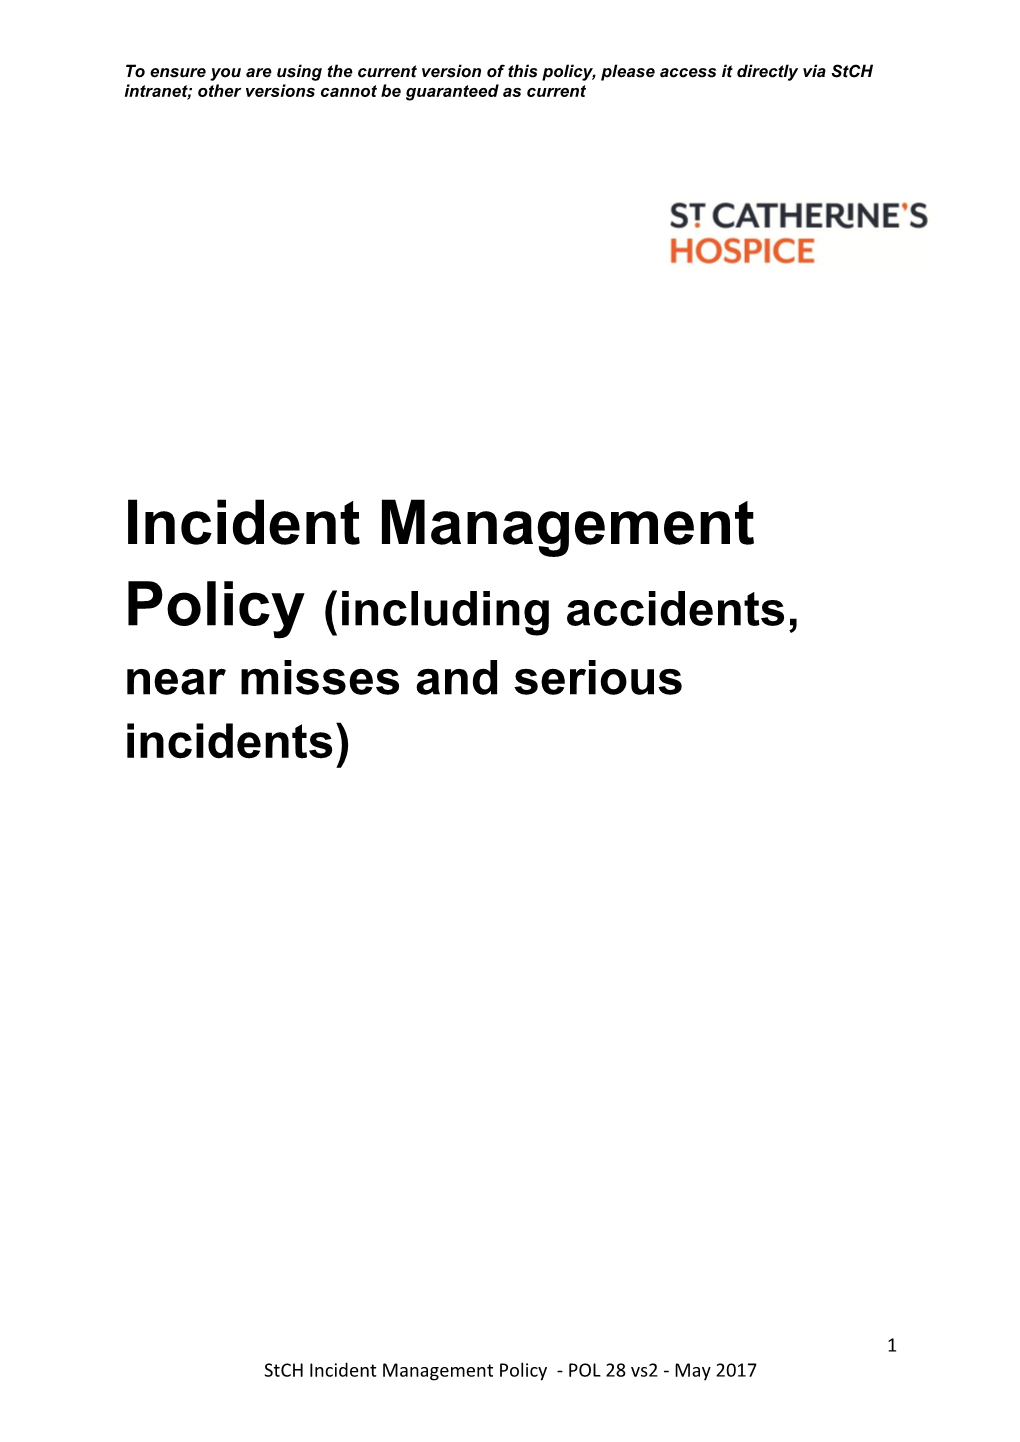 Incident Management Policy (Including Accidents, Near Misses and Serious Incidents)